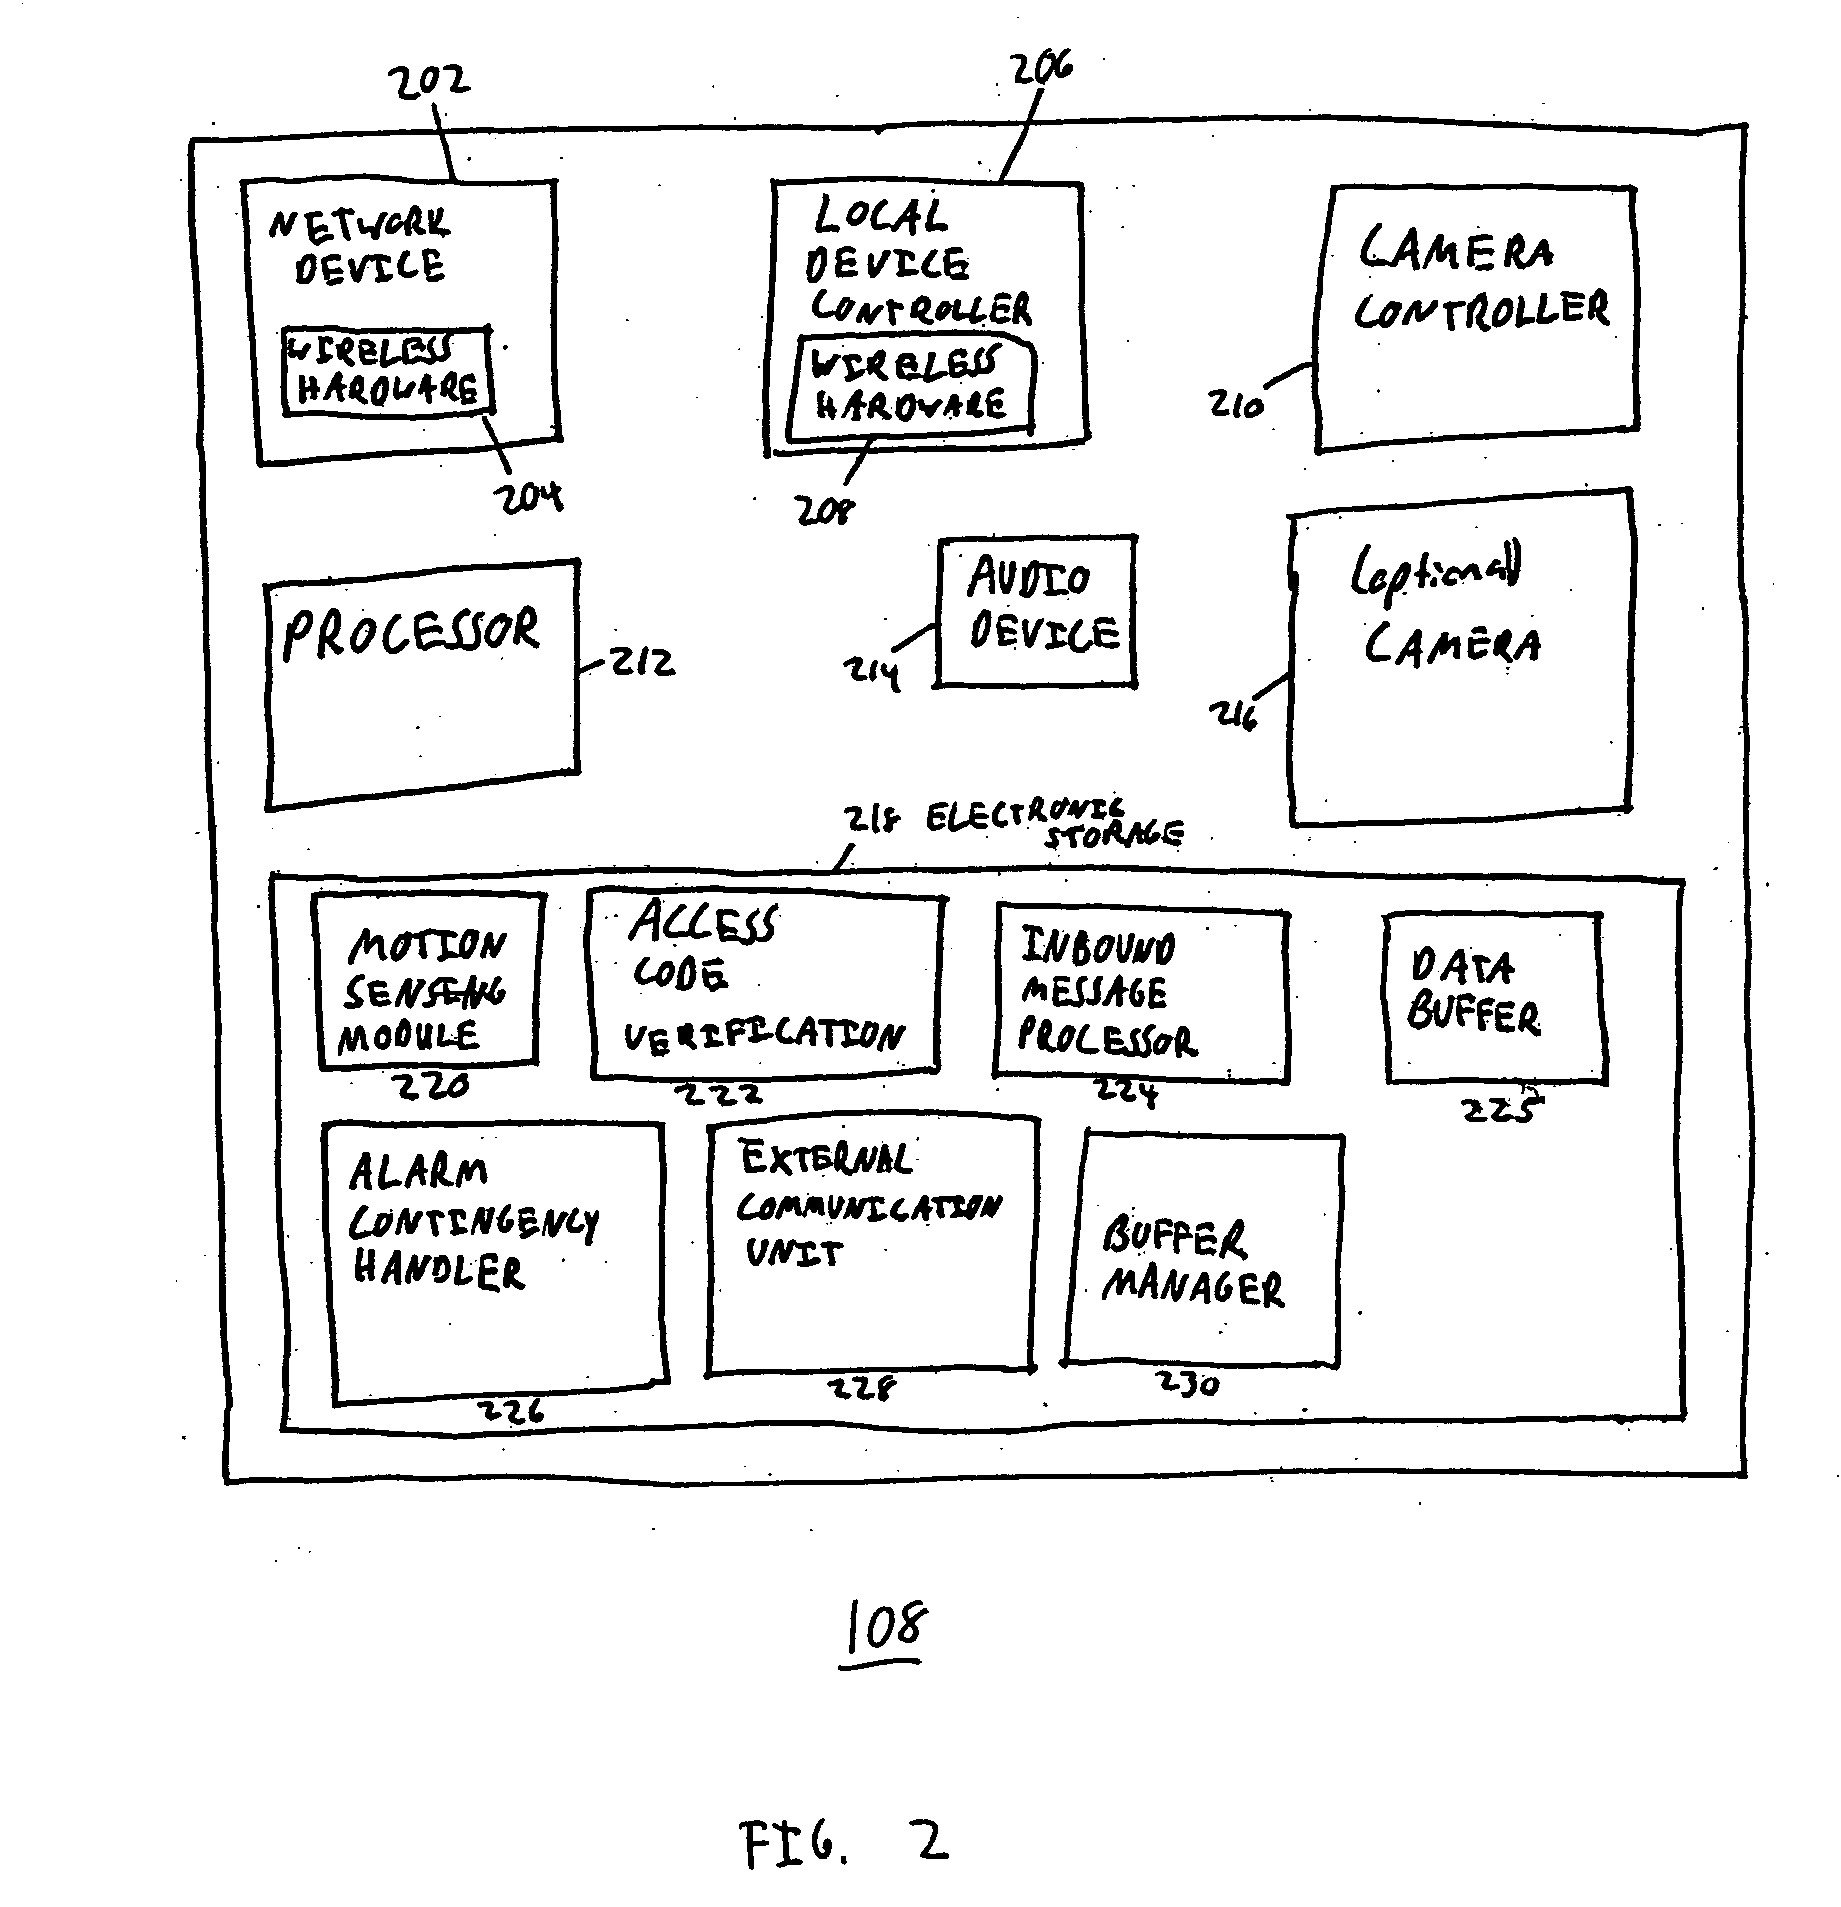 System and method for vision-based security